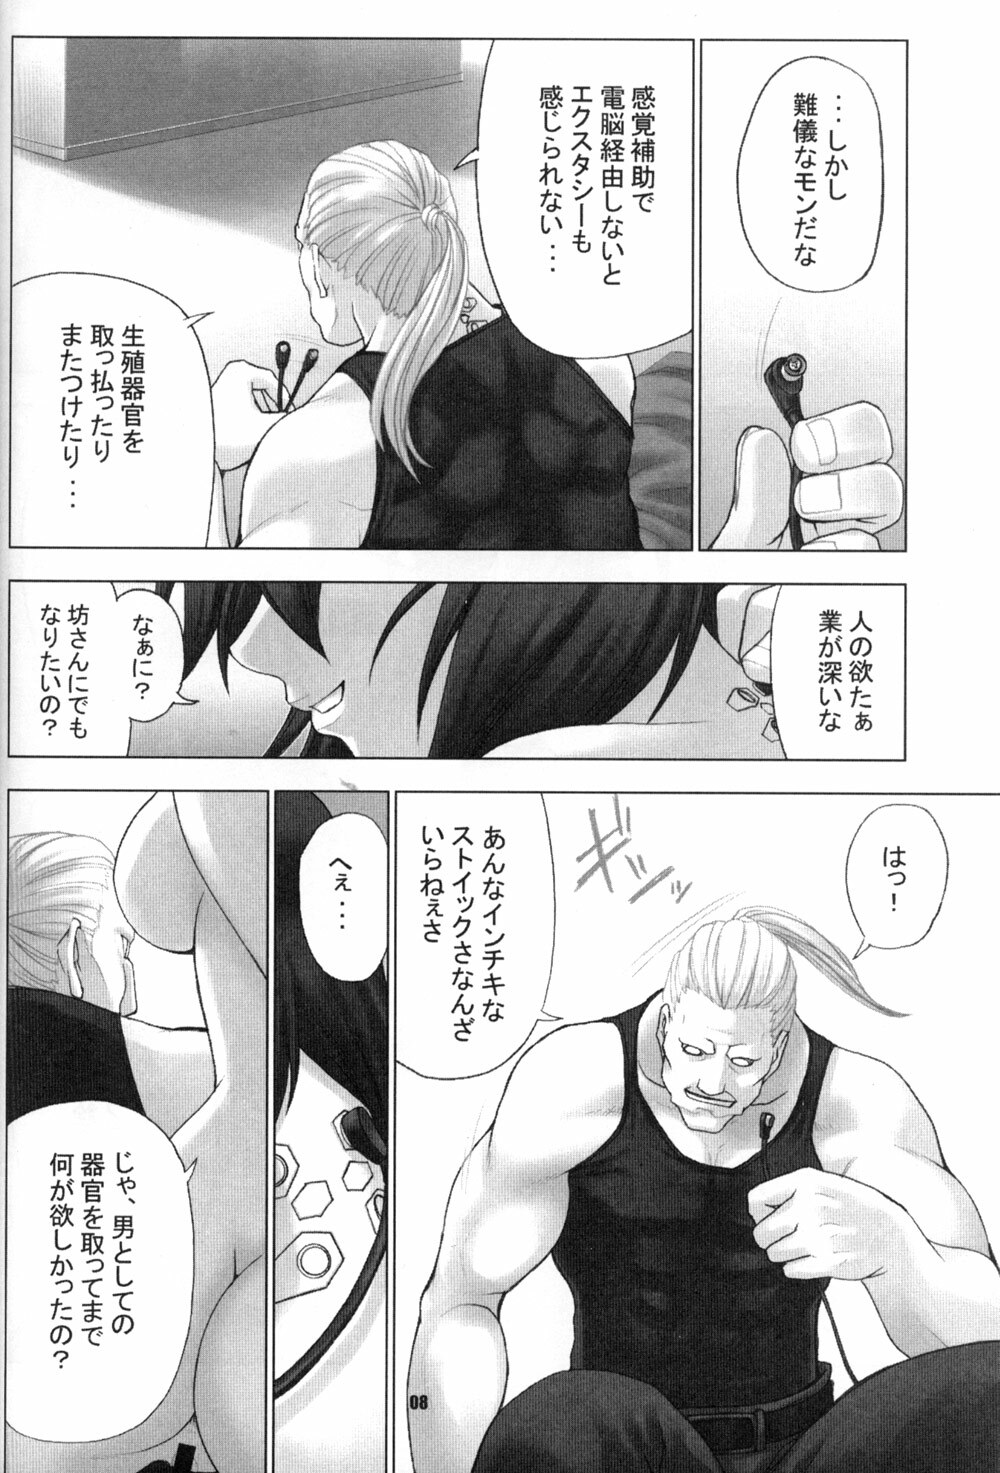 (C66) [Runners High (Chiba Toshirou)] CELLULOID - ACME (Ghost in the Shell) page 8 full